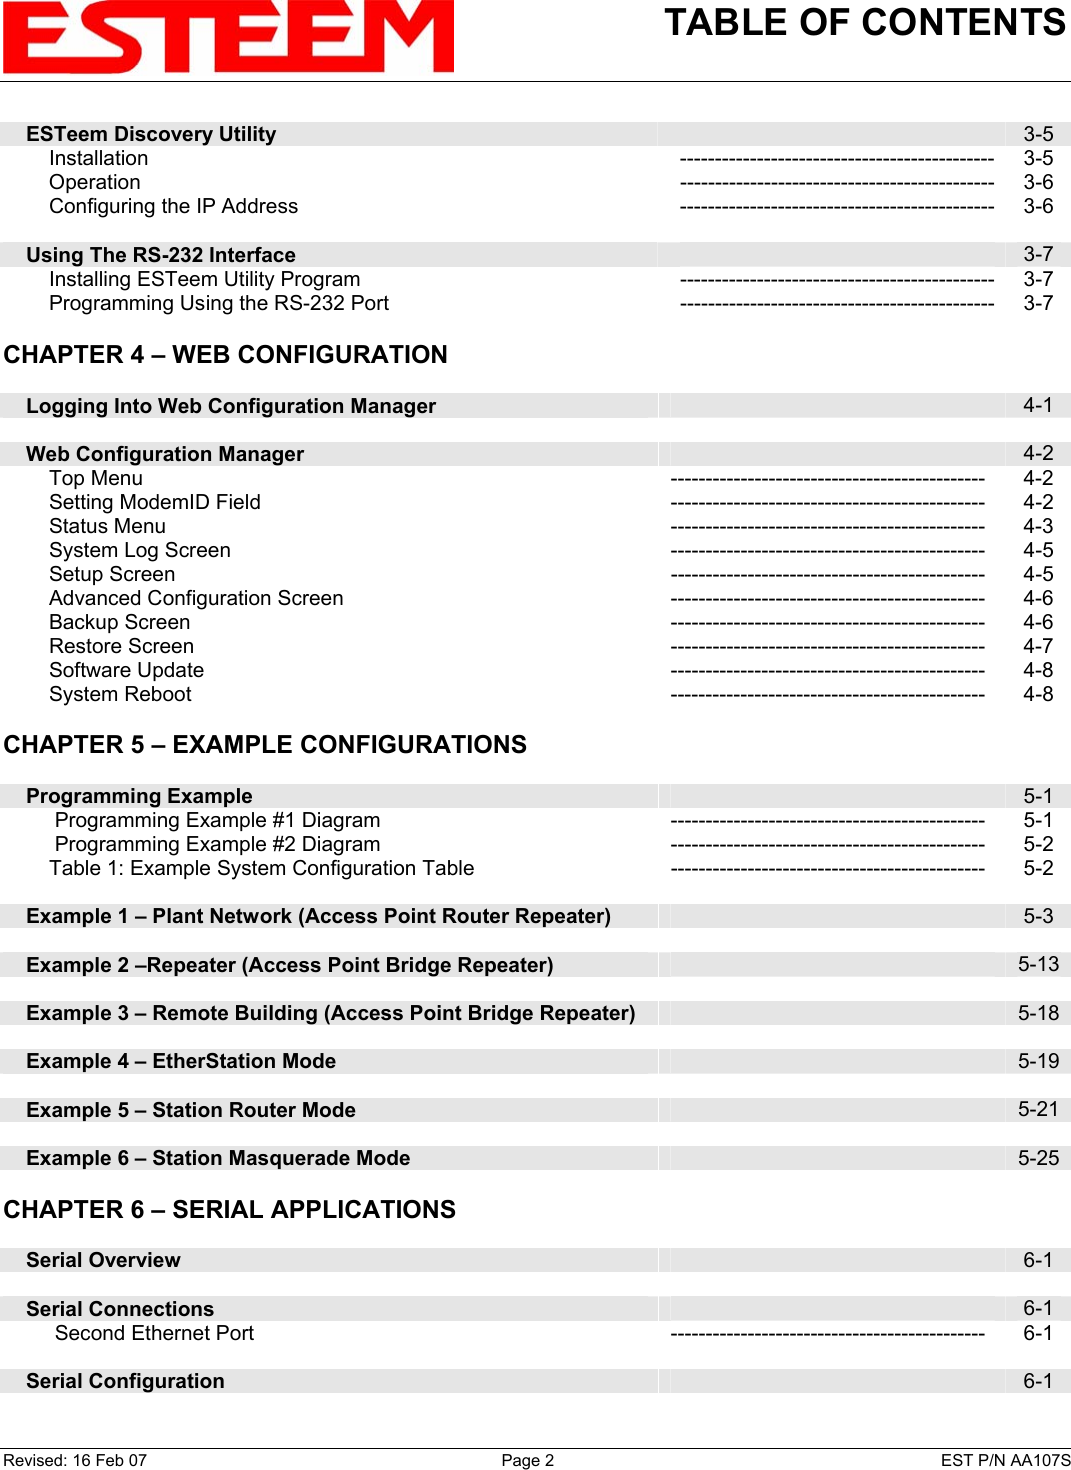 TABLE OF CONTENTS        ESTeem Discovery Utility   3-5         Installation --------------------------------------------- 3-5         Operation --------------------------------------------- 3-6         Configuring the IP Address --------------------------------------------- 3-6        Using The RS-232 Interface   3-7         Installing ESTeem Utility Program --------------------------------------------- 3-7         Programming Using the RS-232 Port --------------------------------------------- 3-7   CHAPTER 4 – WEB CONFIGURATION         Logging Into Web Configuration Manager   4-1        Web Configuration Manager   4-2         Top Menu  ---------------------------------------------  4-2         Setting ModemID Field --------------------------------------------- 4-2         Status Menu  ---------------------------------------------  4-3         System Log Screen --------------------------------------------- 4-5         Setup Screen  ---------------------------------------------  4-5         Advanced Configuration Screen --------------------------------------------- 4-6         Backup Screen  ---------------------------------------------  4-6         Restore Screen  ---------------------------------------------  4-7         Software Update --------------------------------------------- 4-8         System Reboot --------------------------------------------- 4-8    CHAPTER 5 – EXAMPLE CONFIGURATIONS         Programming Example   5-1          Programming Example #1 Diagram --------------------------------------------- 5-1          Programming Example #2 Diagram --------------------------------------------- 5-2         Table 1: Example System Configuration Table  ---------------------------------------------  5-2        Example 1 – Plant Network (Access Point Router Repeater)   5-3        Example 2 –Repeater (Access Point Bridge Repeater)   5-13       Example 3 – Remote Building (Access Point Bridge Repeater)   5-18       Example 4 – EtherStation Mode   5-19       Example 5 – Station Router Mode   5-21       Example 6 – Station Masquerade Mode   5-25   CHAPTER 6 – SERIAL APPLICATIONS         Serial Overview   6-1        Serial Connections   6-1          Second Ethernet Port --------------------------------------------- 6-1        Serial Configuration   6-1    Revised: 16 Feb 07  Page 2  EST P/N AA107S 